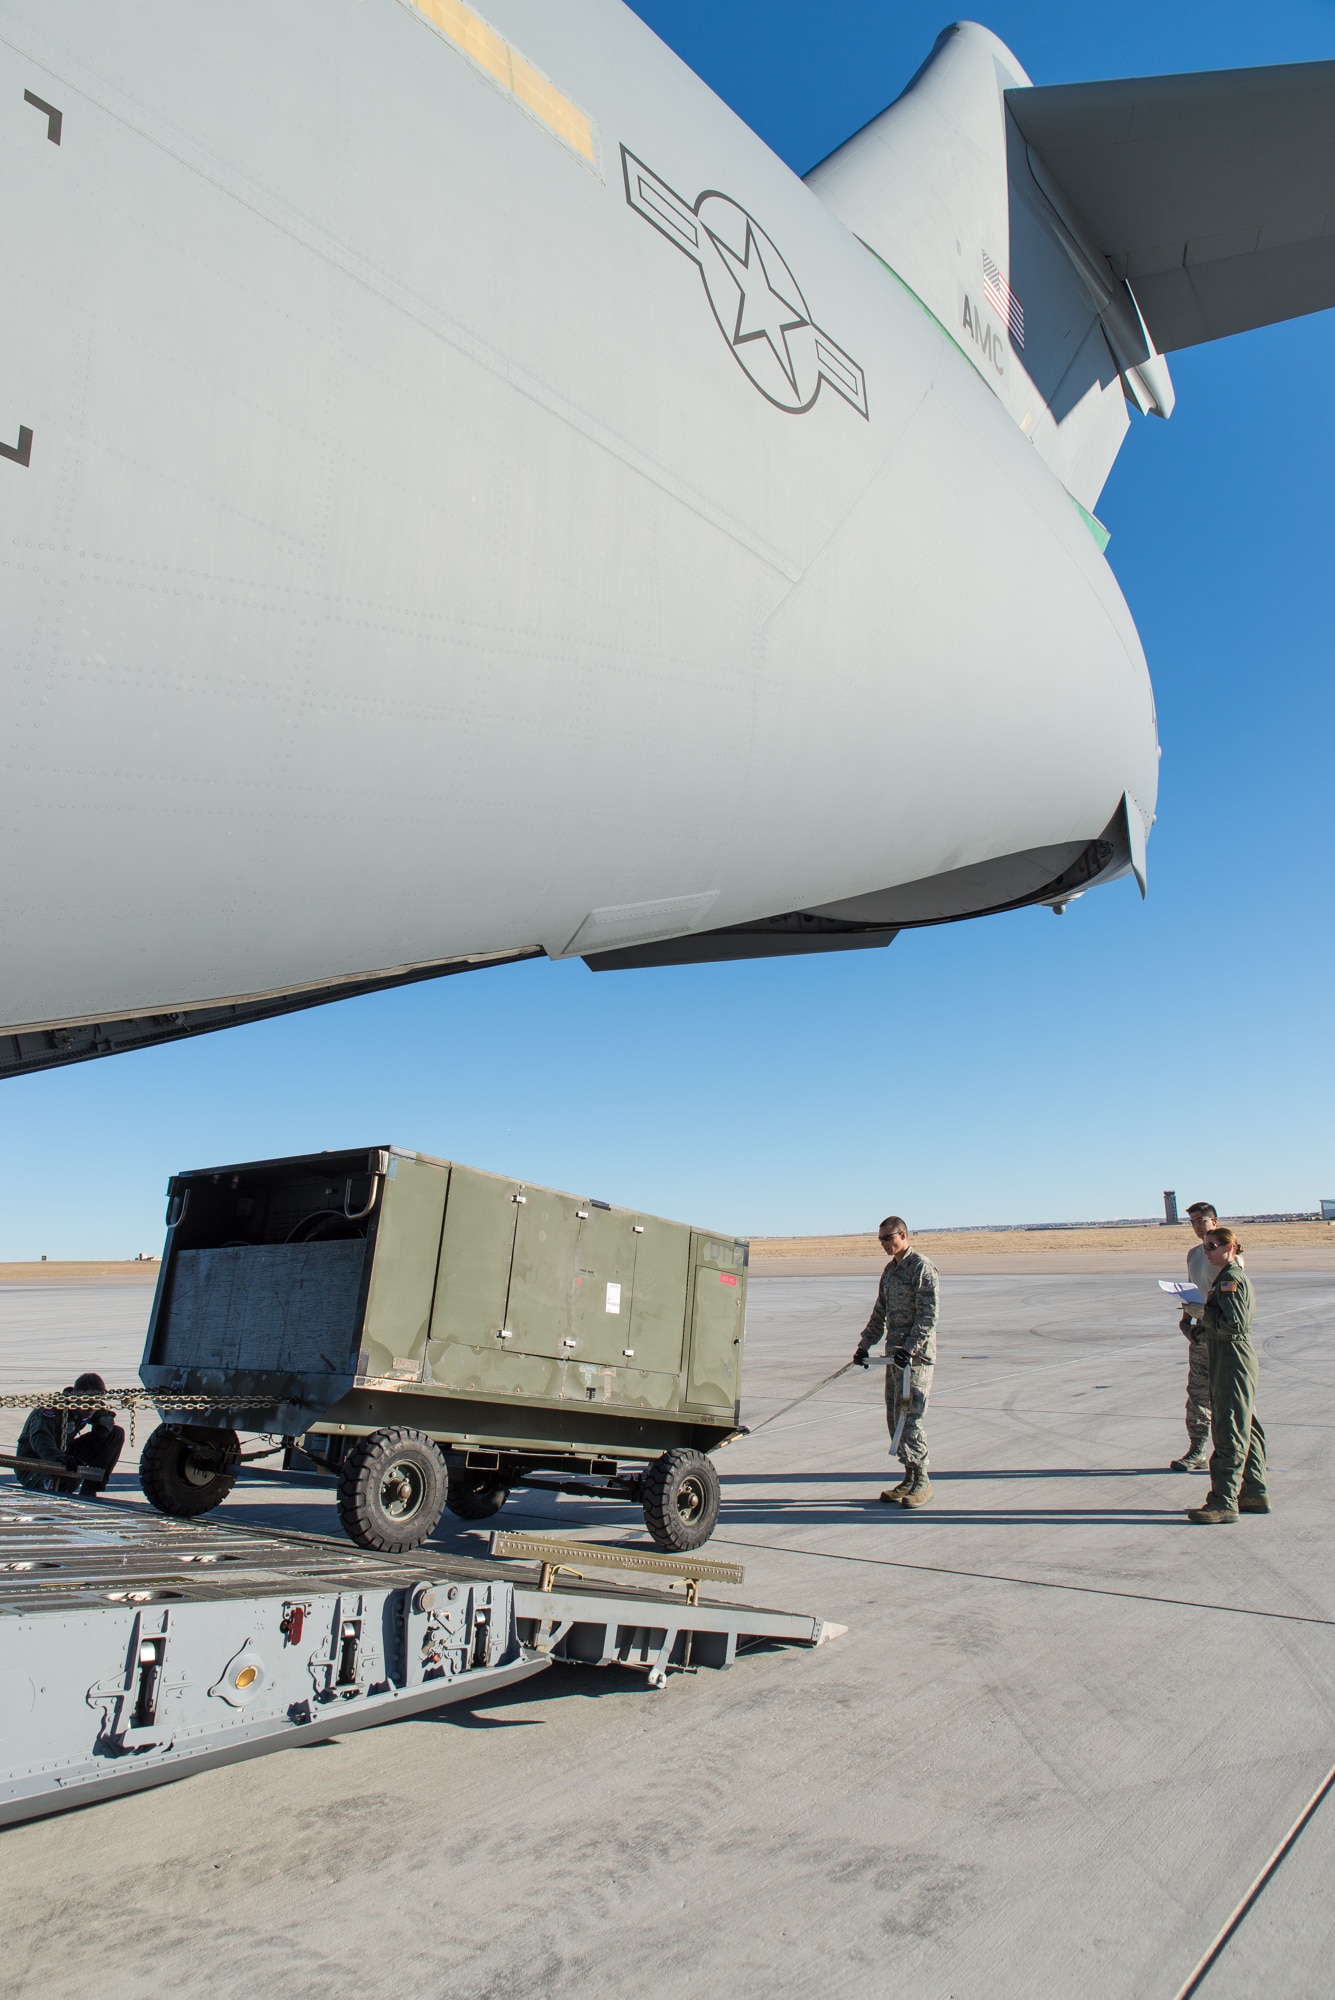 Airmen assigned to the 153rd Airlift Wing, Wyoming Air National Guard, Cheyenne, Wyoming, load cargo Feb. 11, 2015, at Buckley Air Force Base in Aurora, Colorado in support of the 140th Wing, Colorado Air National Guard deployment to South Korea.
The WY ANG air transportation specialists along with an airman from the 90th Missile Wing, F.E. Warren Air Force Base, Cheyenne, collaborated with the 433rd Airlift Control Flight and 733rd Student Training Squadron, Joint Base Lackland, to upload over 311,000 pounds of cargo. (U.S. Air National Guard photo by Master Sgt. Charles Delano/released)
